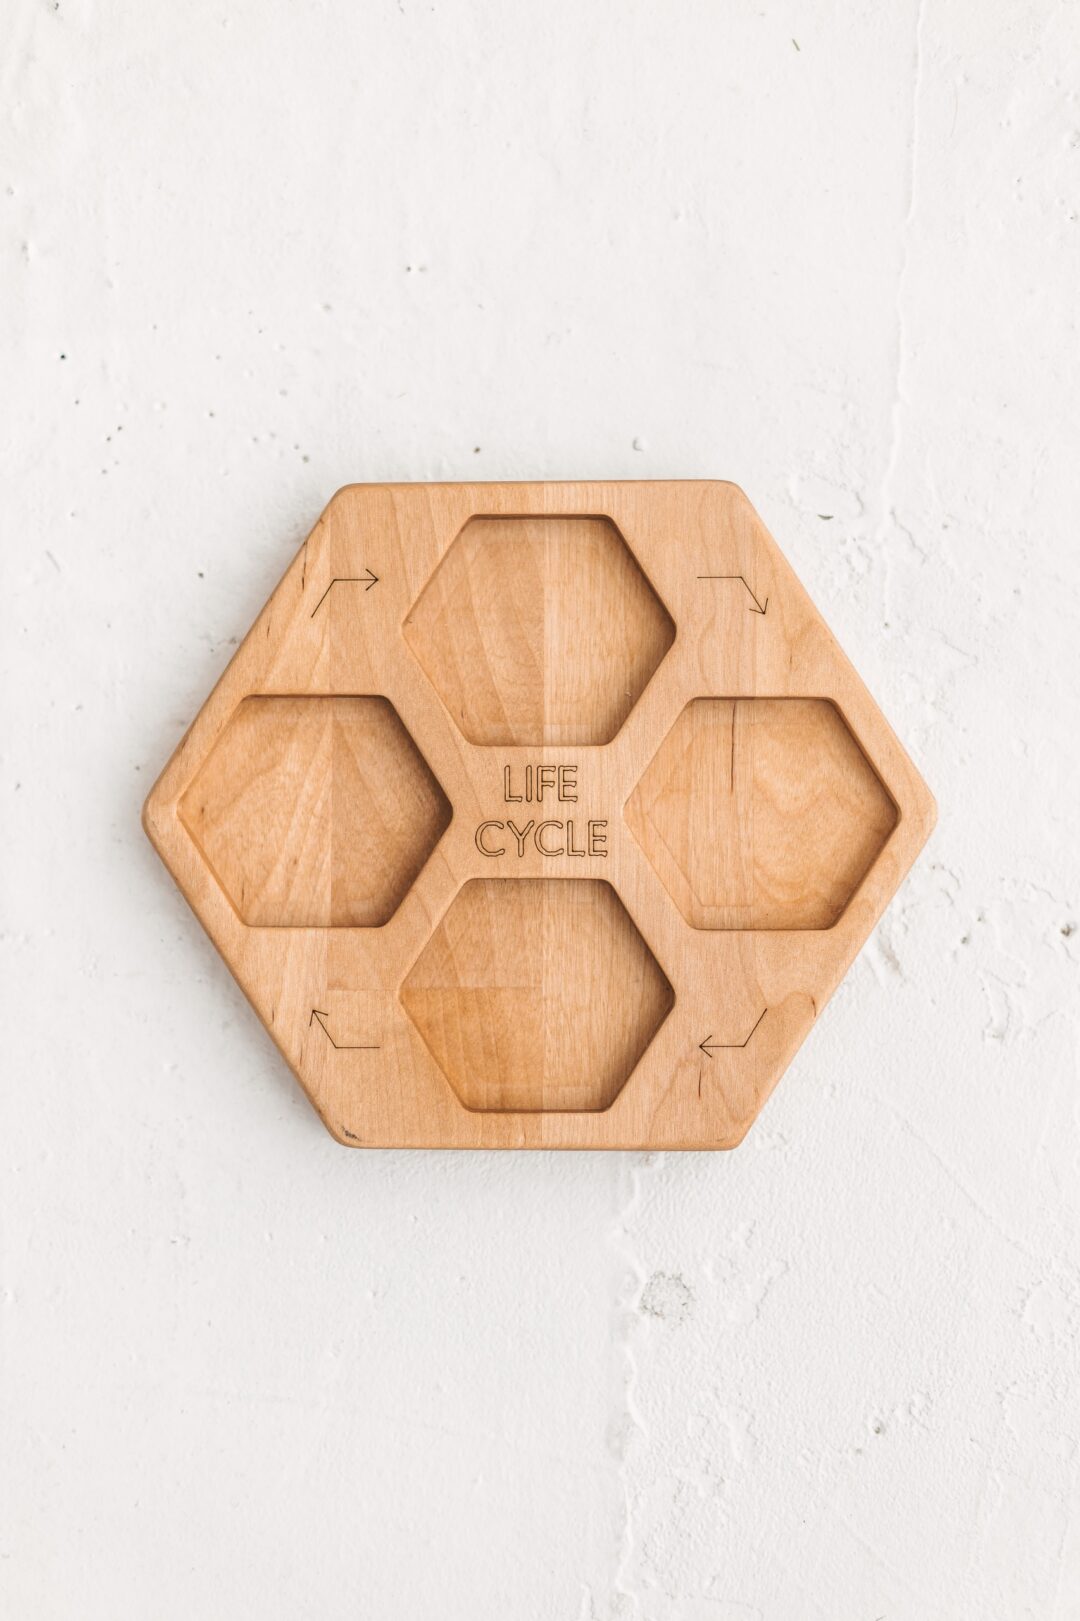 wooden Life cycle tray you could make kids learning science and biology in more interesting and creative way.